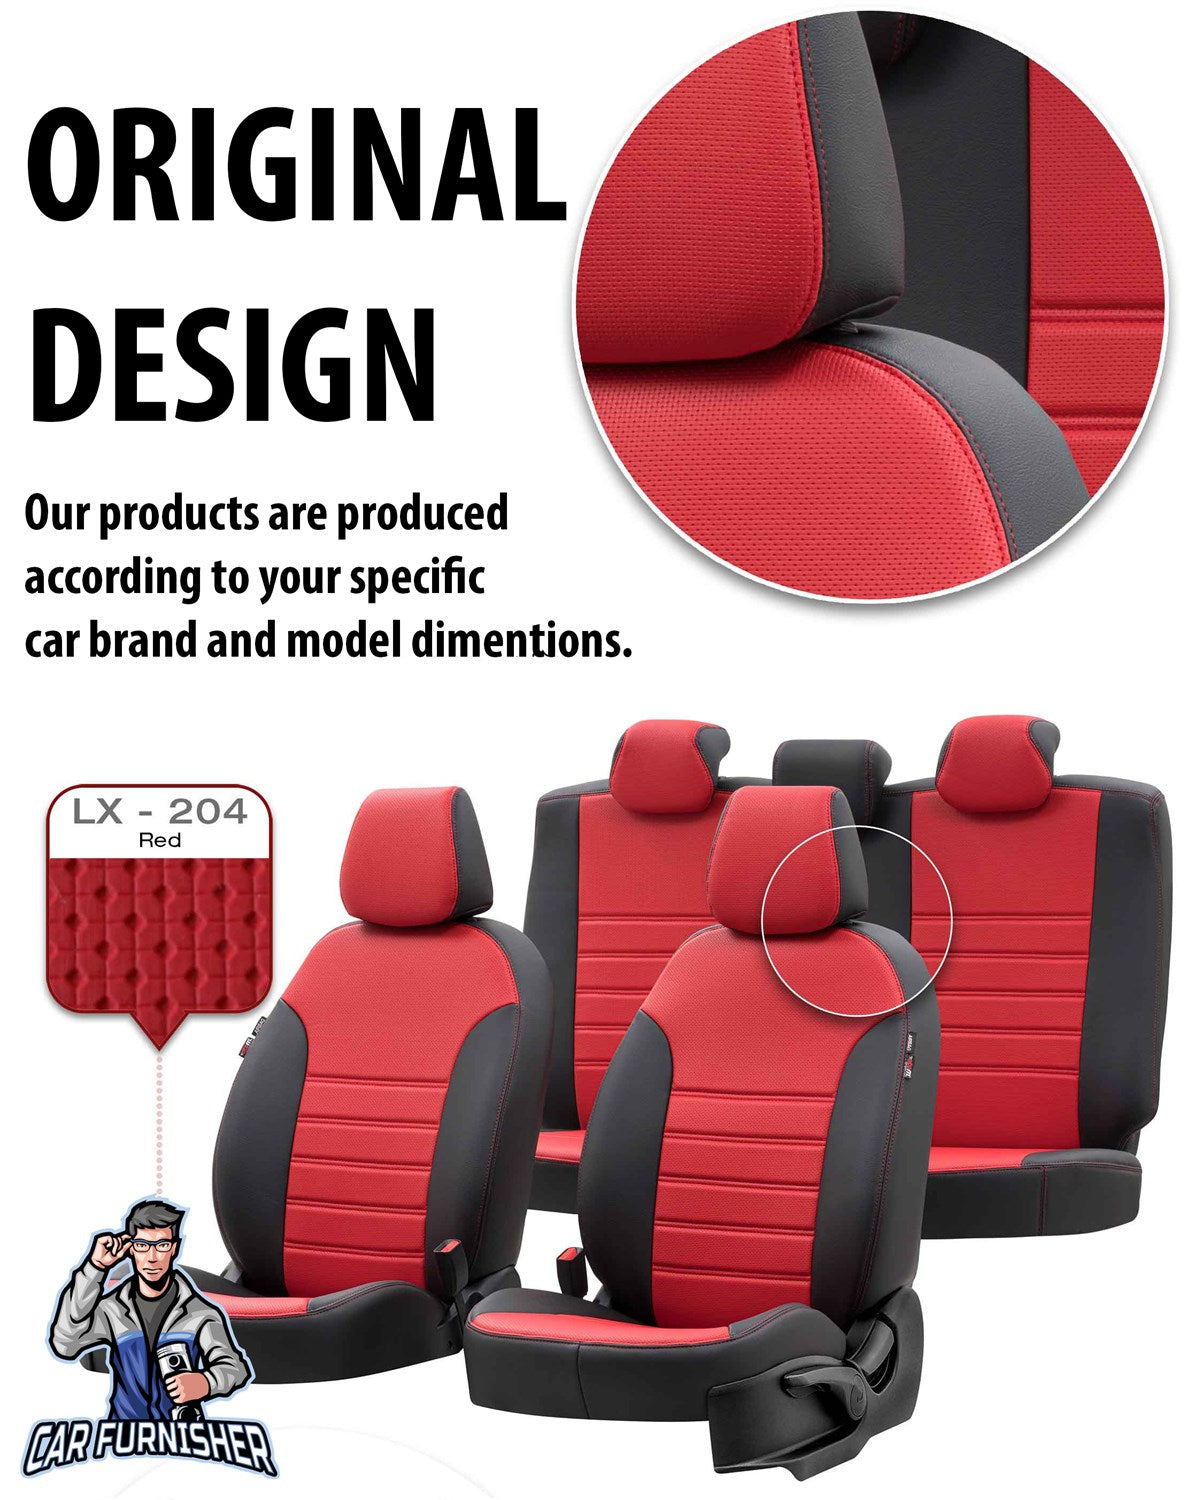 Peugeot 301 Seat Covers New York Leather Design Smoked Black Leather